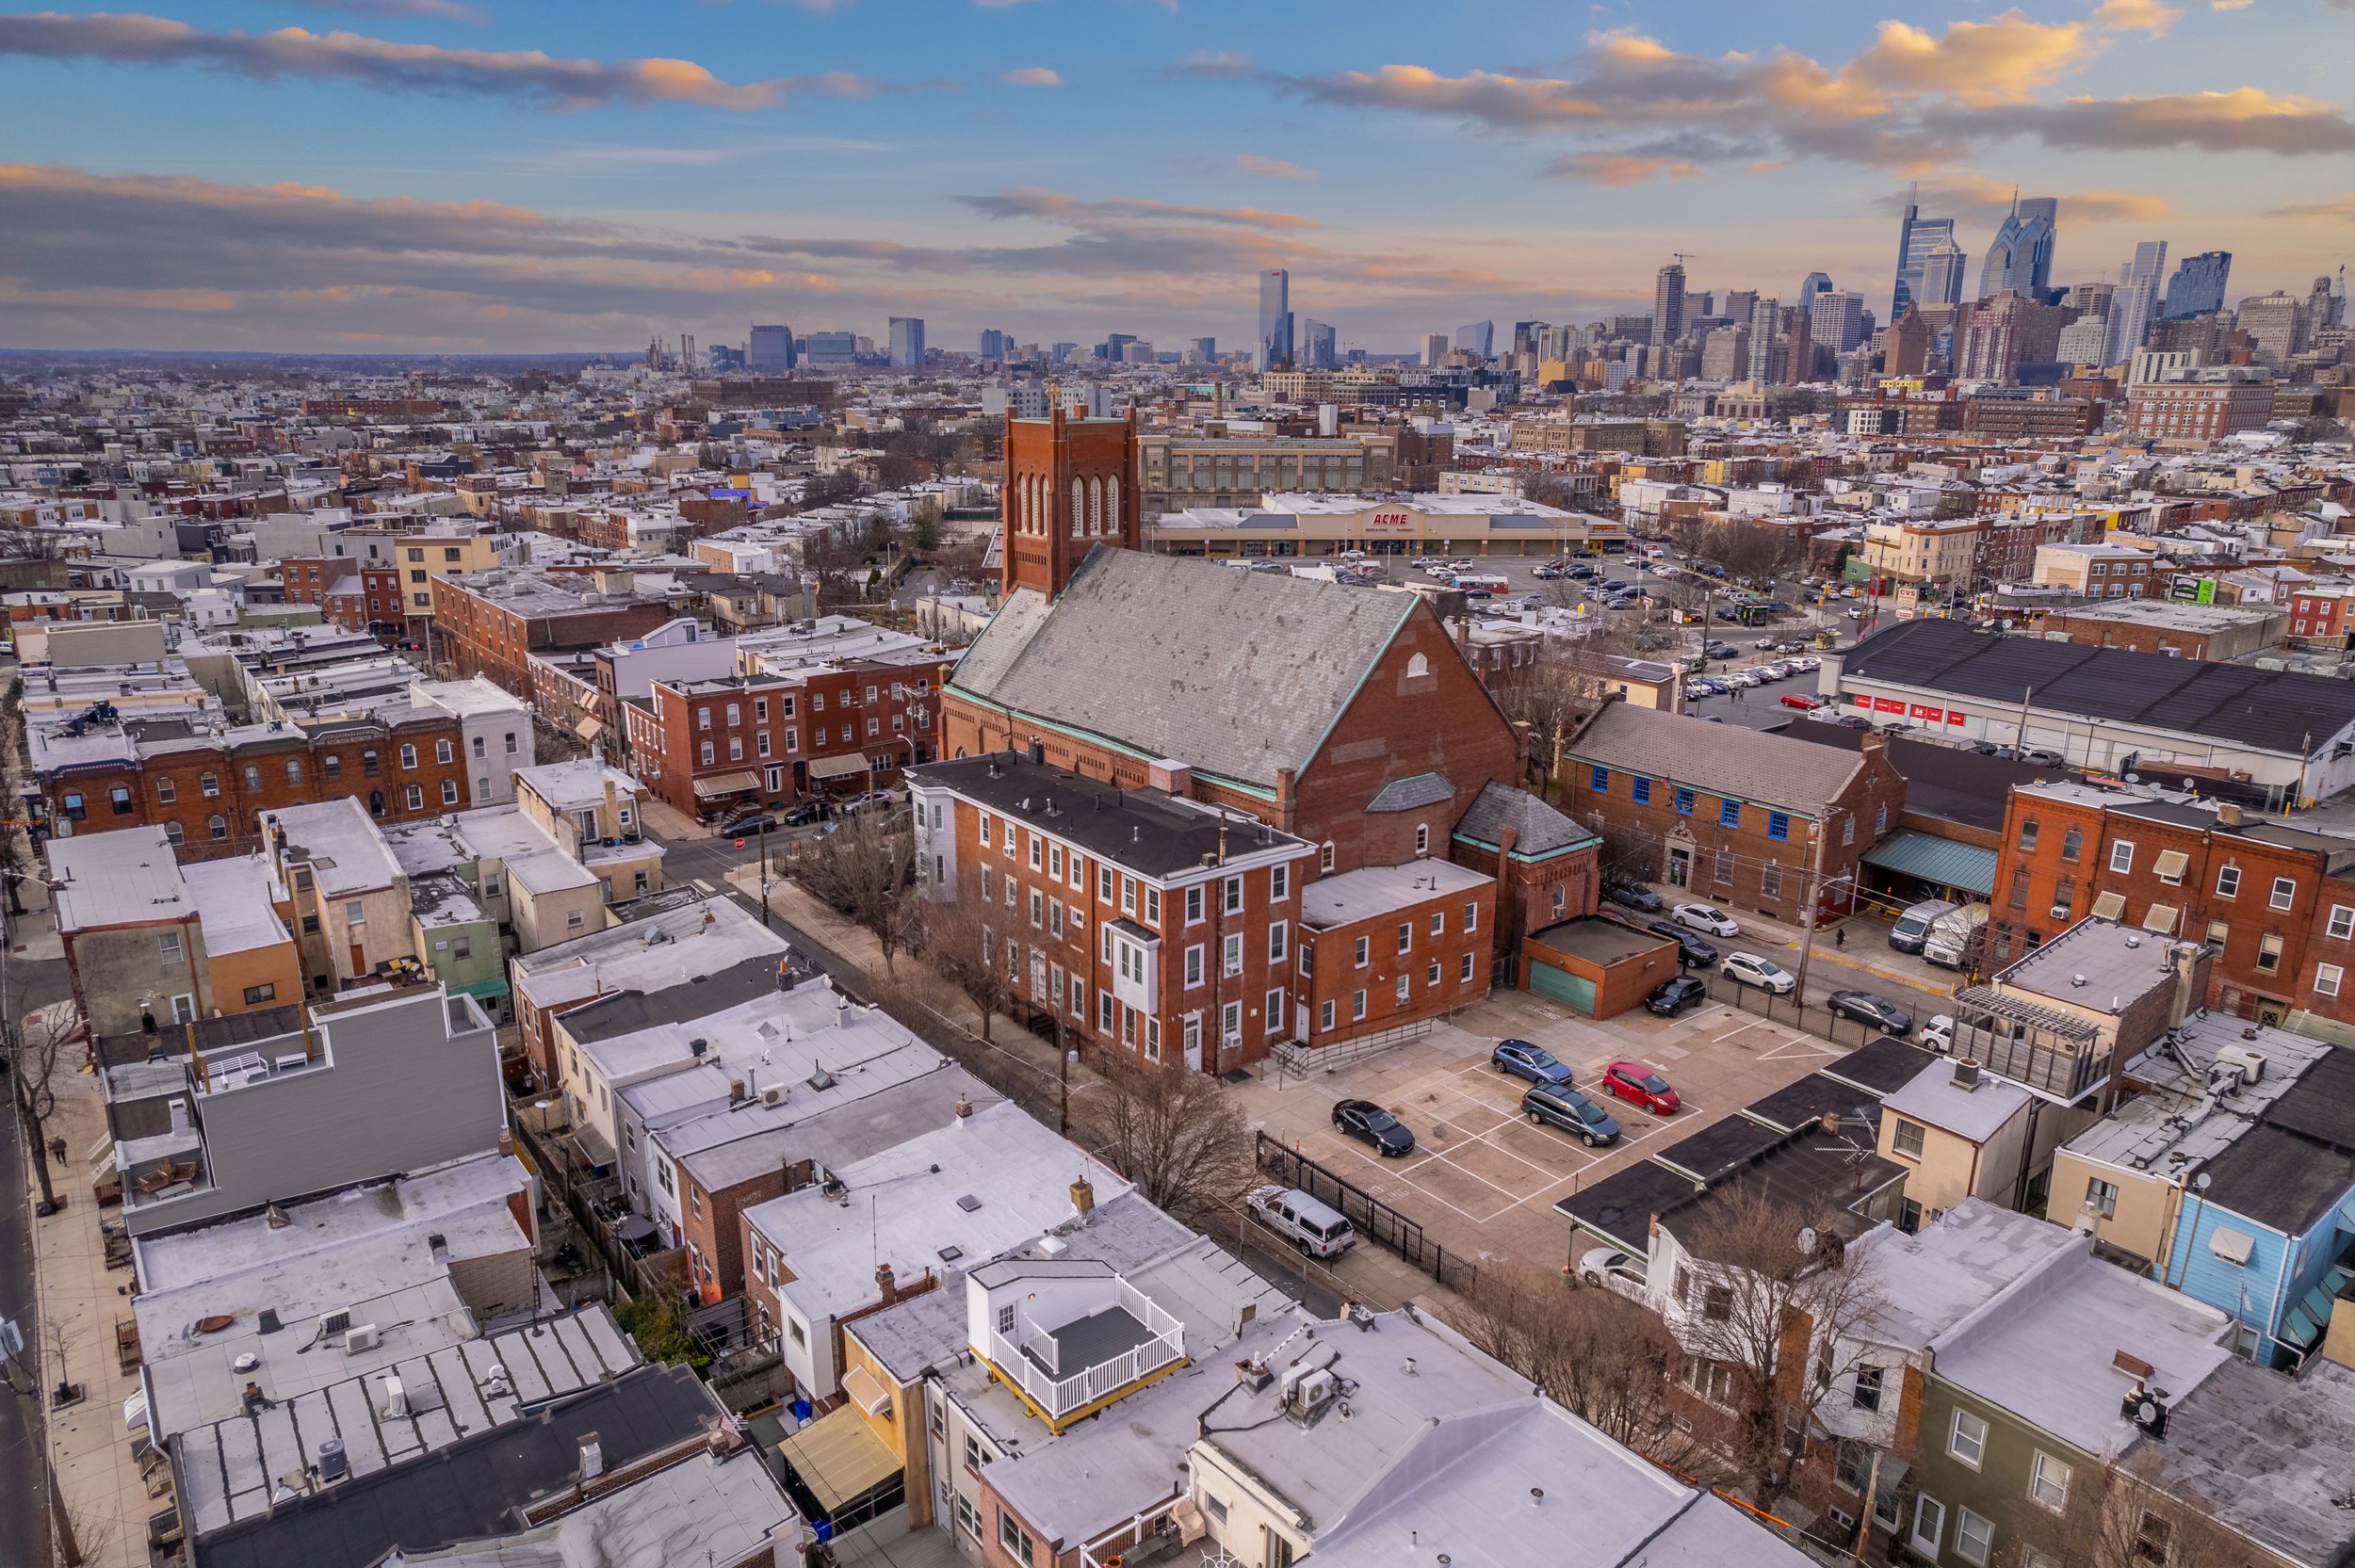 914 GREENWICH ST AERIAL PHOTOGRAPHY Ⓒ WEFILMPHILLY-5.jpg